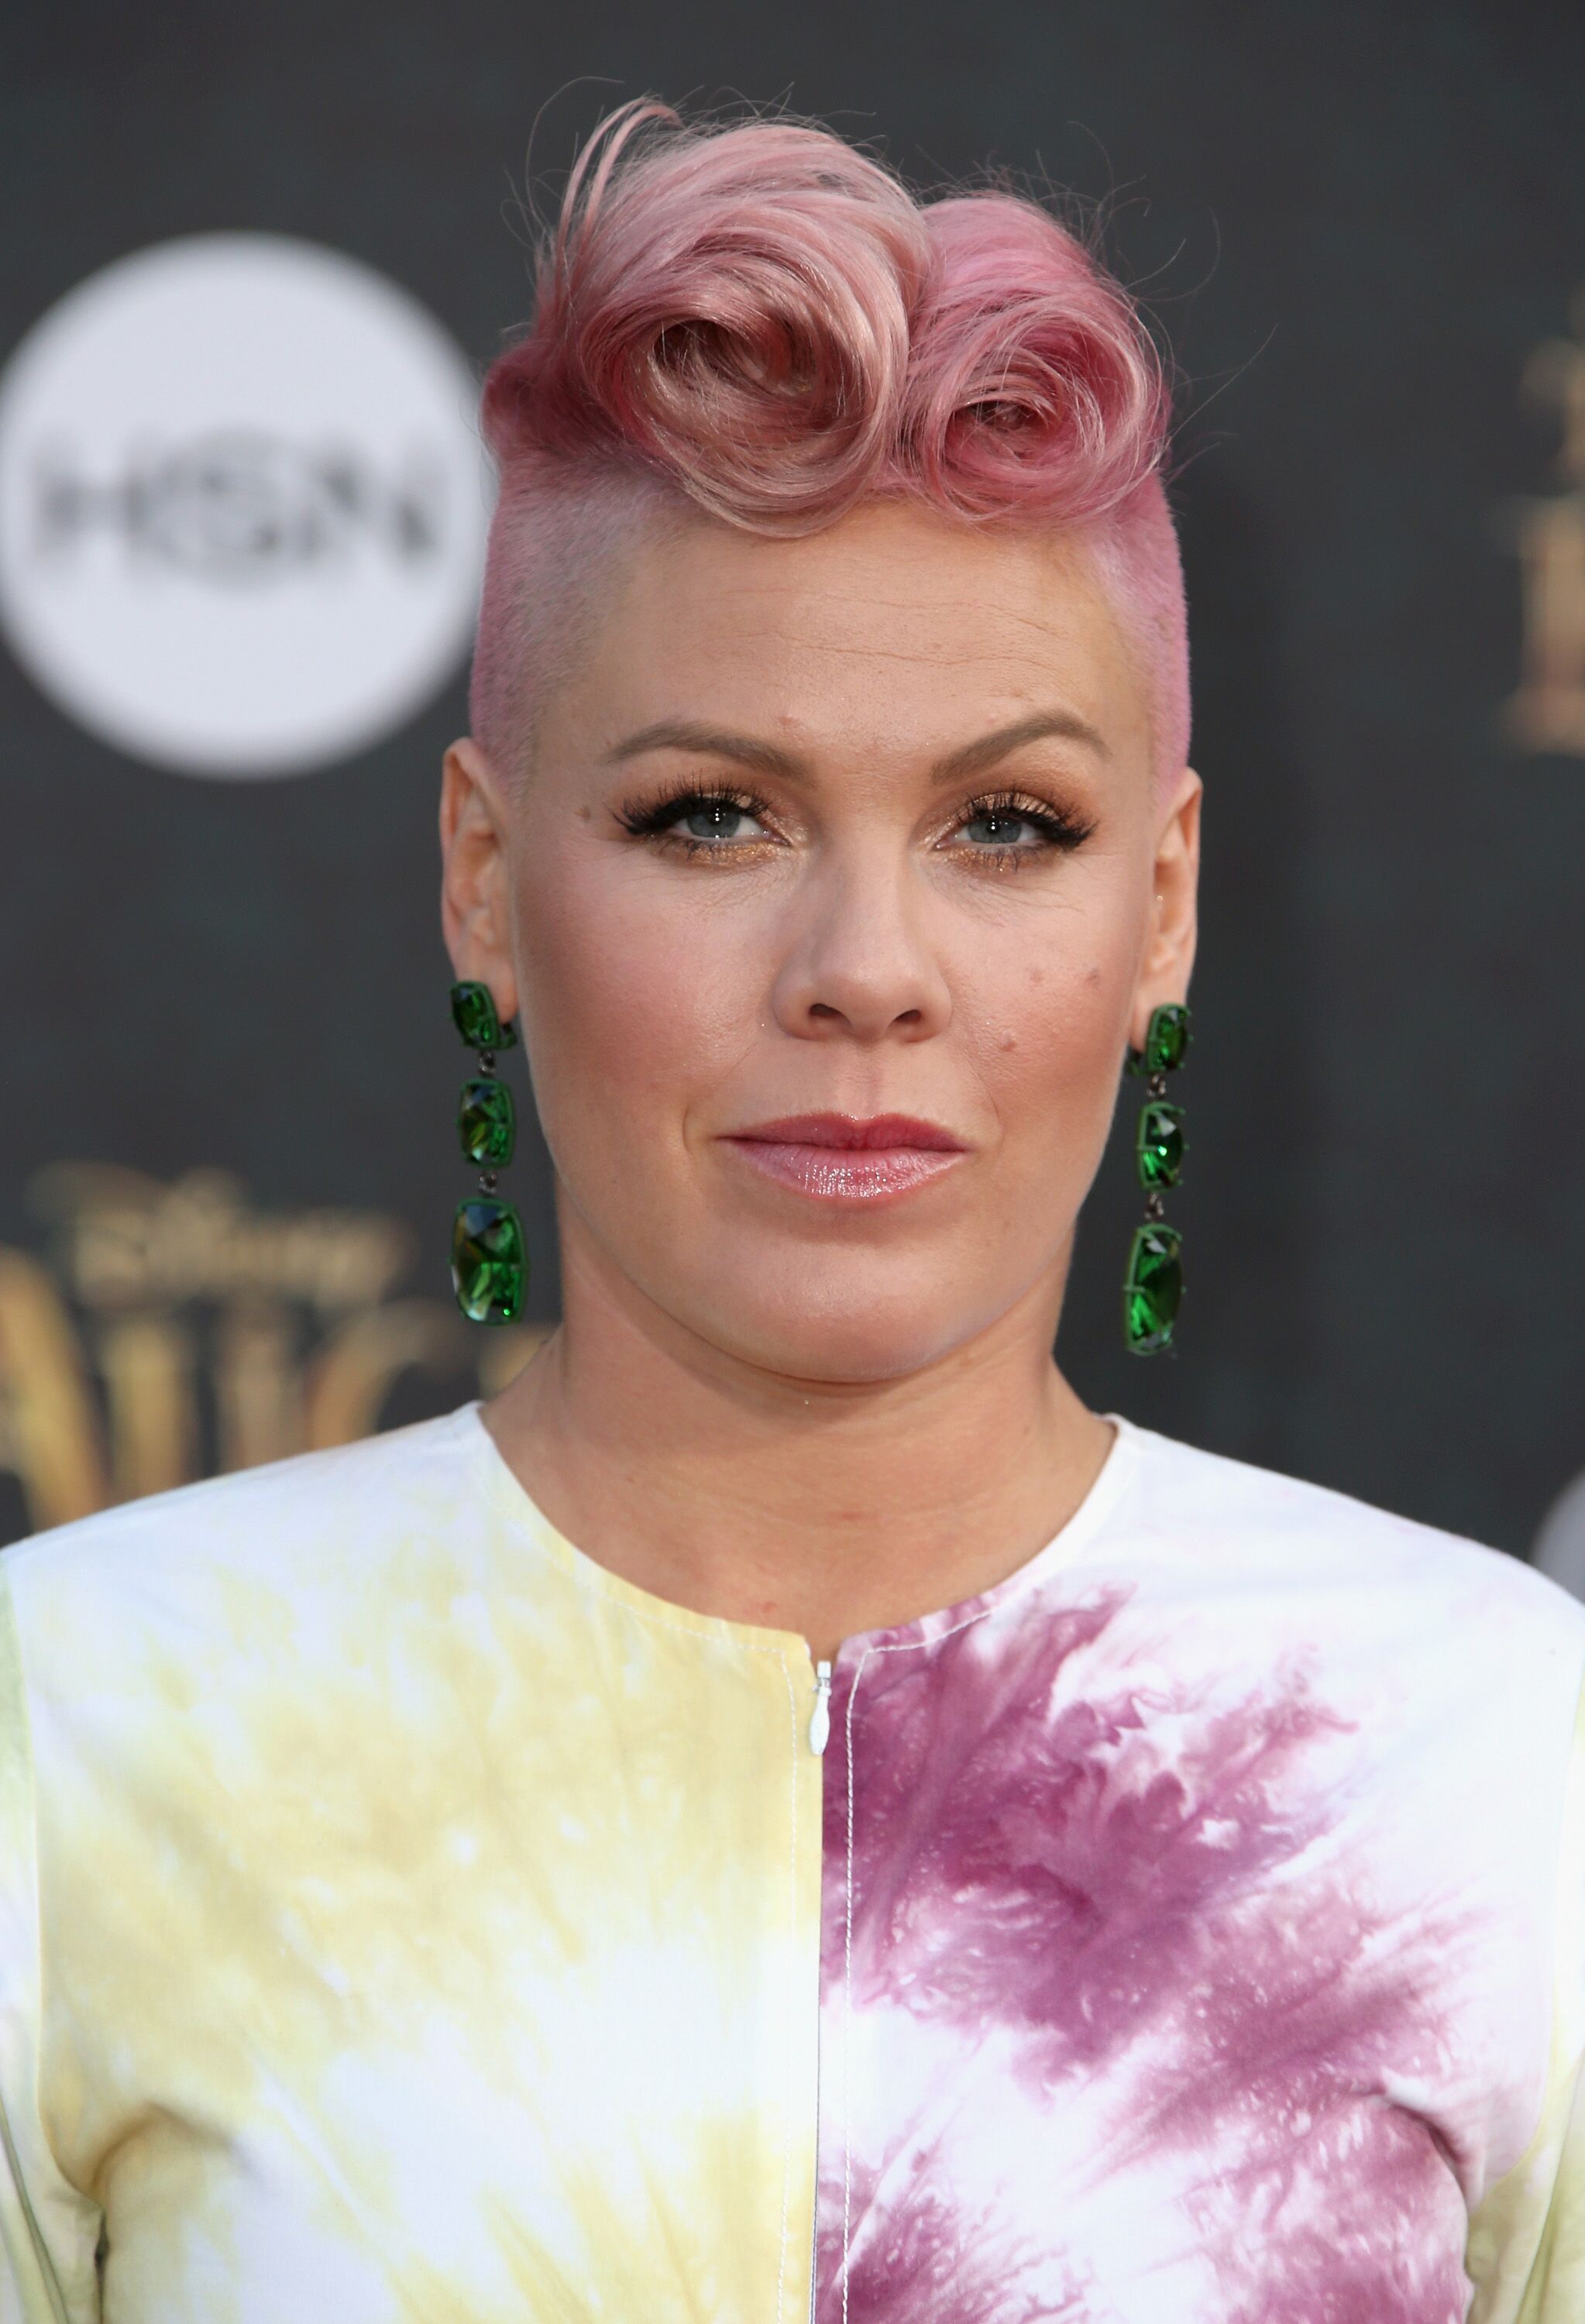 P!nk attends the premiere of Disney's "Alice Through The Looking Glass at the El Capitan Theatre on May 23, 2016 in Hollywood, California | Photo: Getty Images